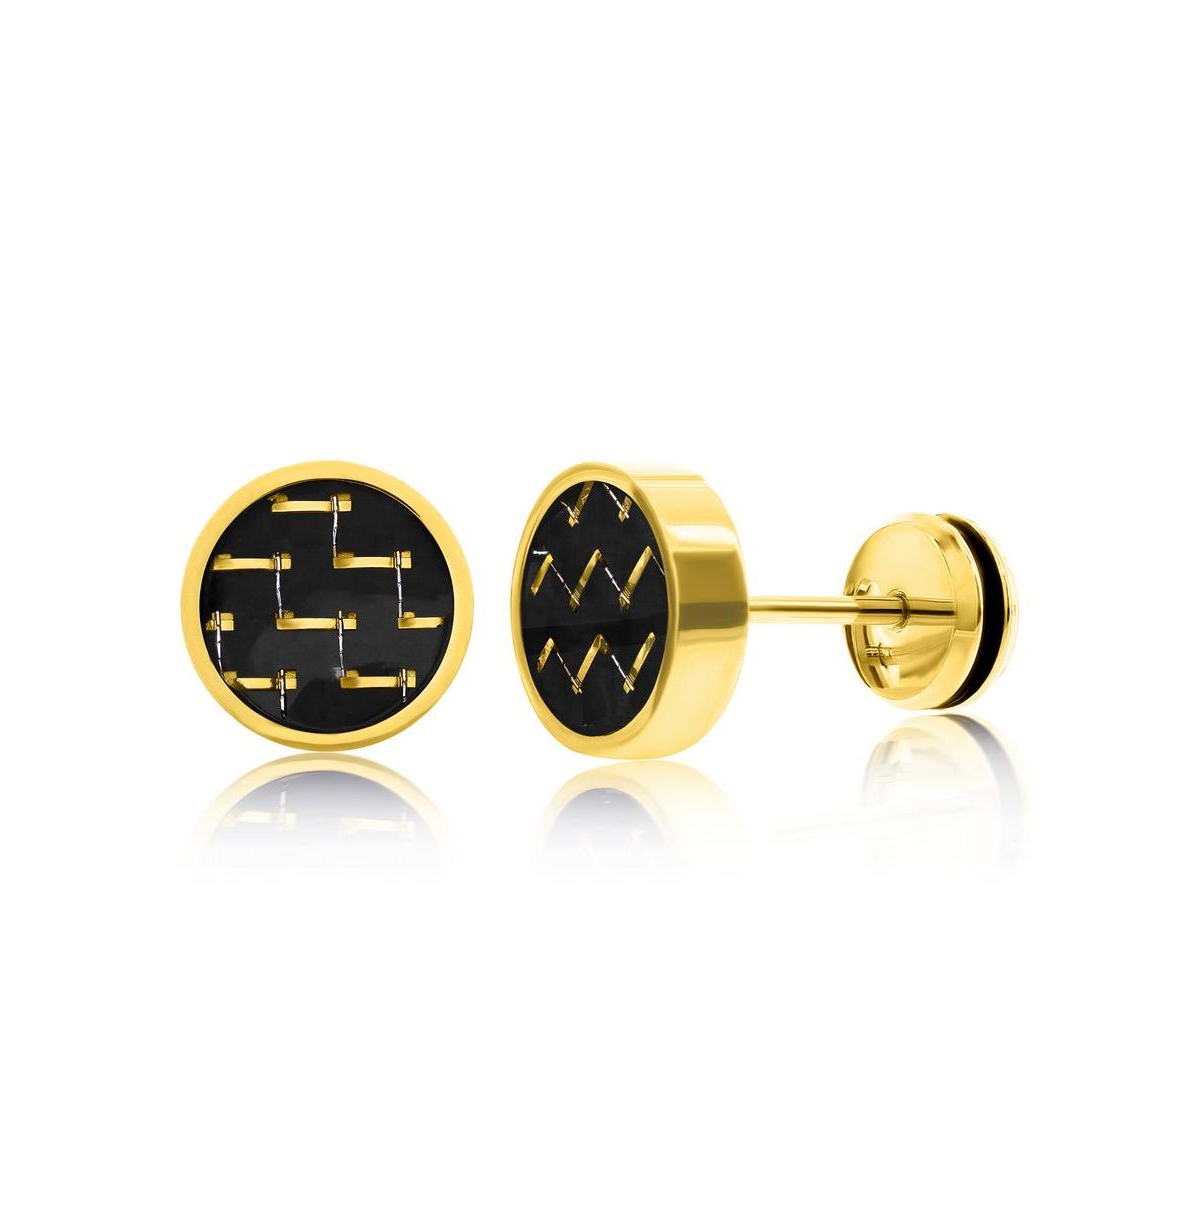 Gold Plated Over Stainless Steel 10mm Black Carbon Fiber Stud Earrings - Gold